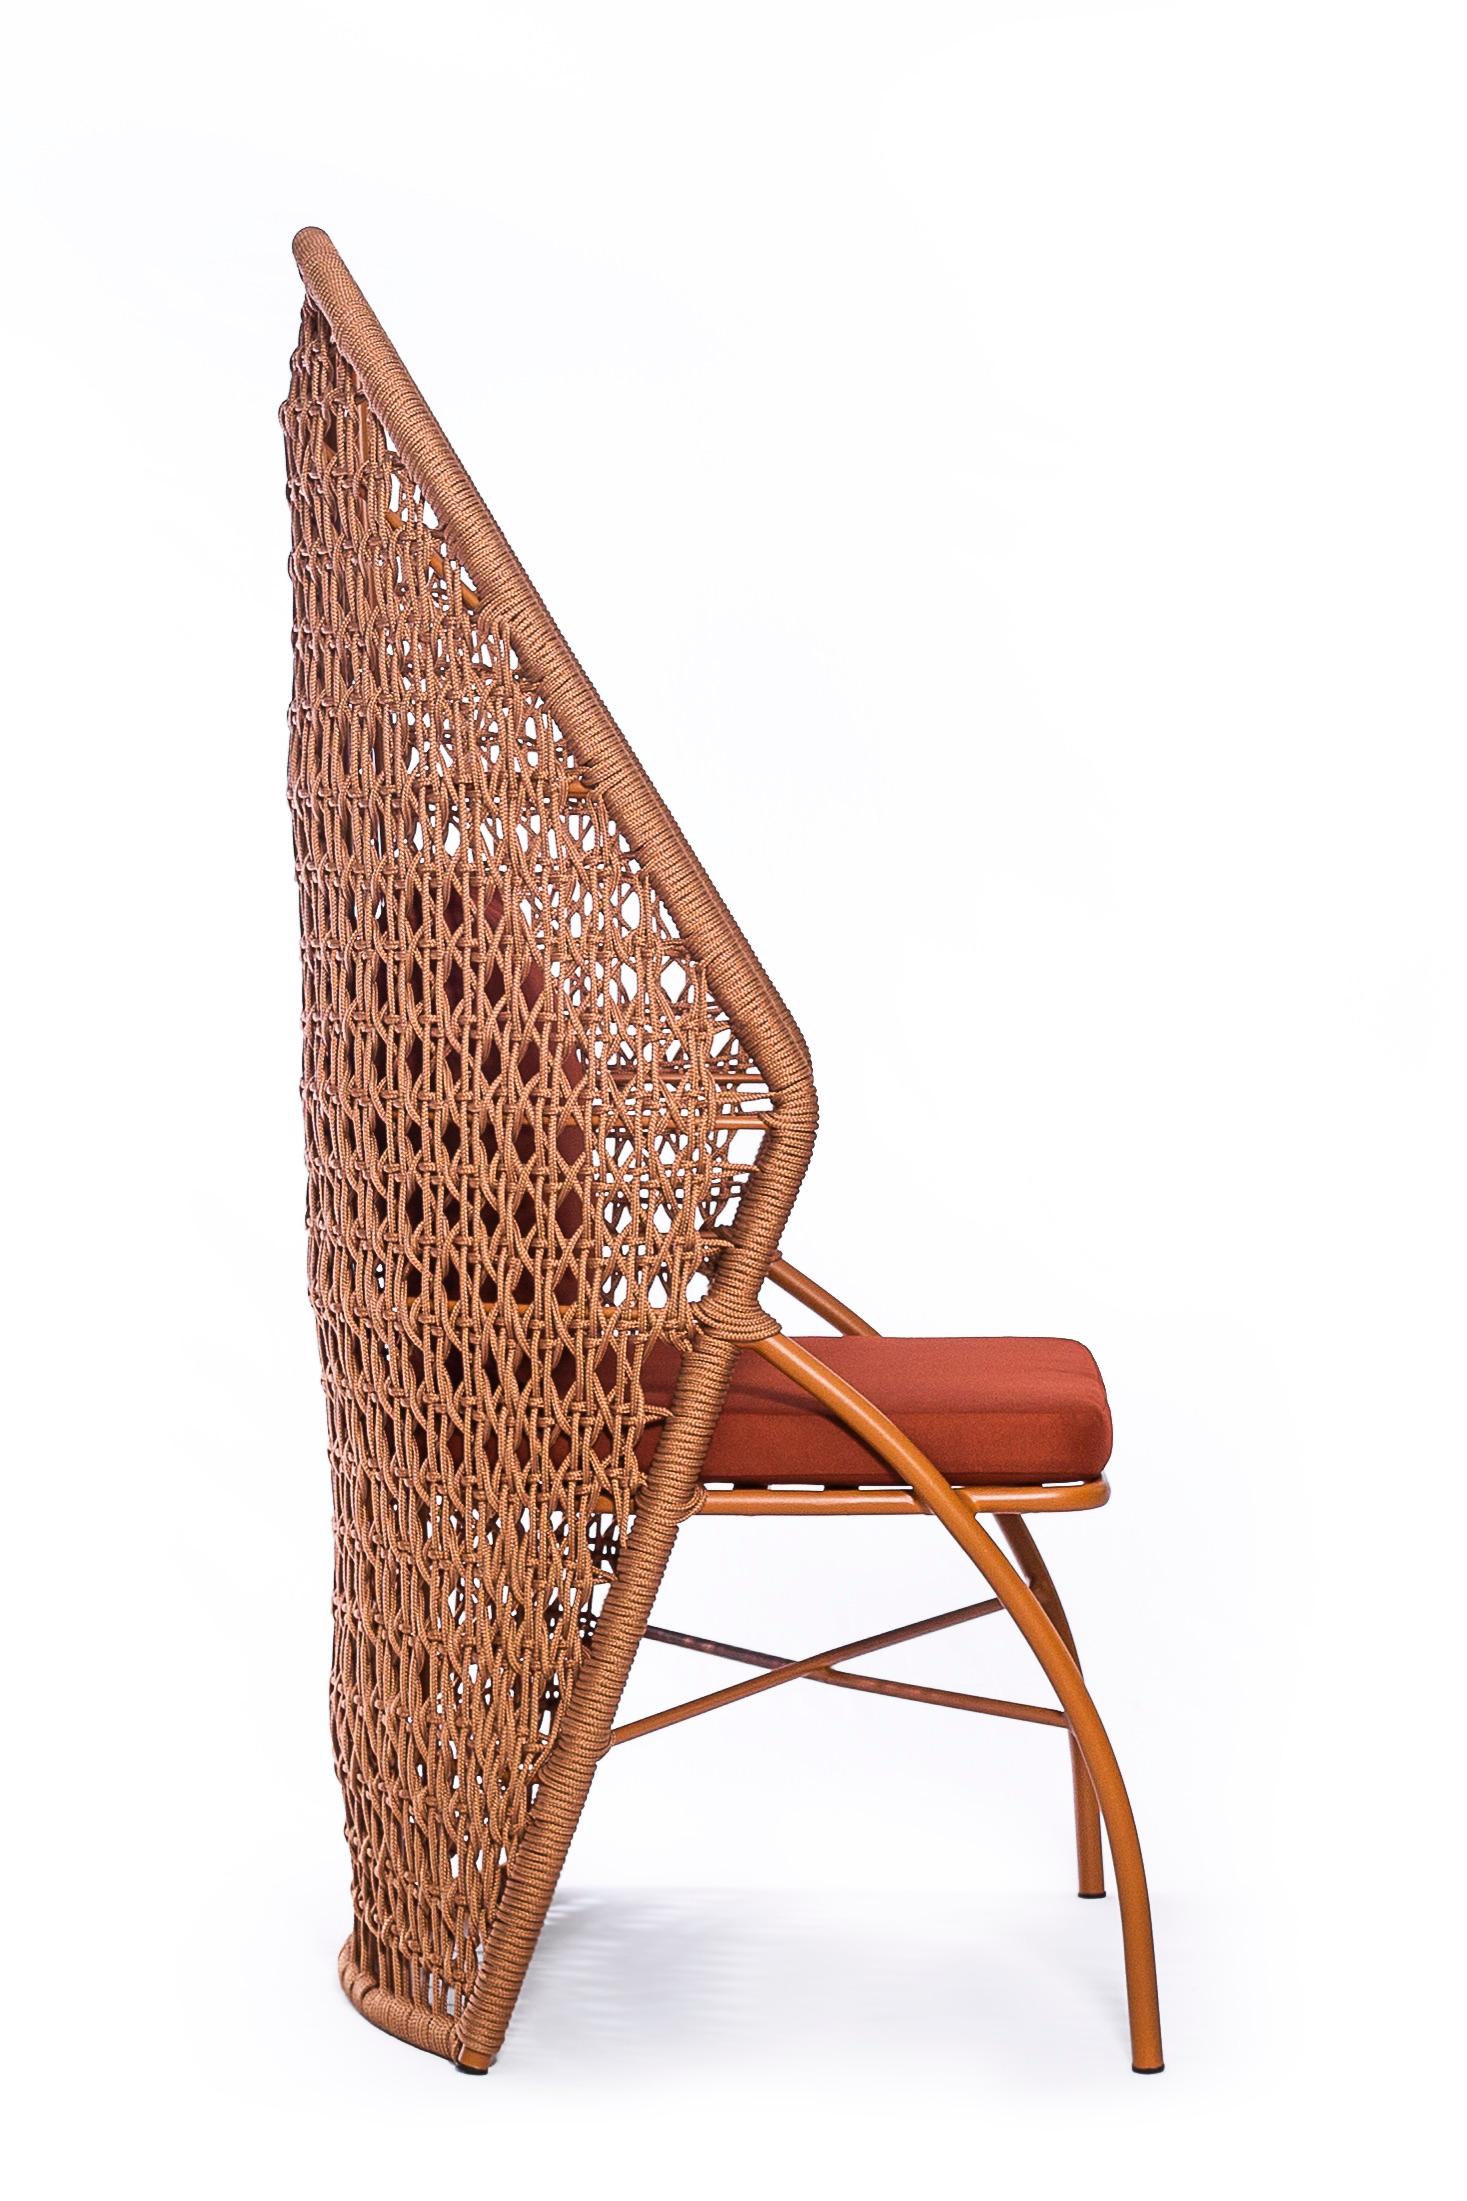 The Belize armchair is inspired by the lush nature of Belize's coral reefs.
Its curvilinear features in aluminum materialize the soul of the project in every minute detail of the handmade naval rope braid, the unique and imposing geometry that